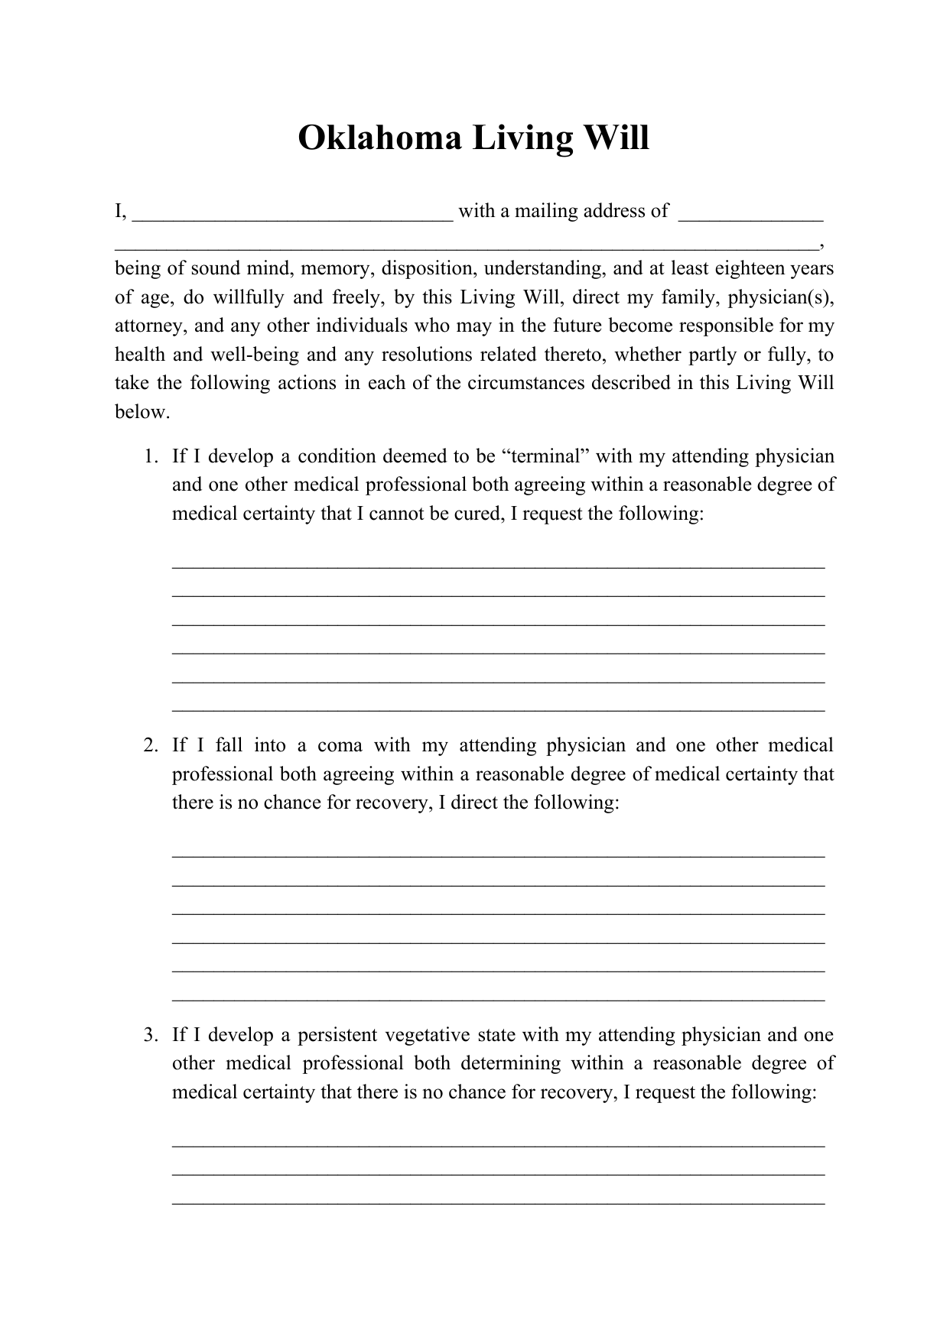 Oklahoma Living Will Form Fill Out Sign Online and Download PDF